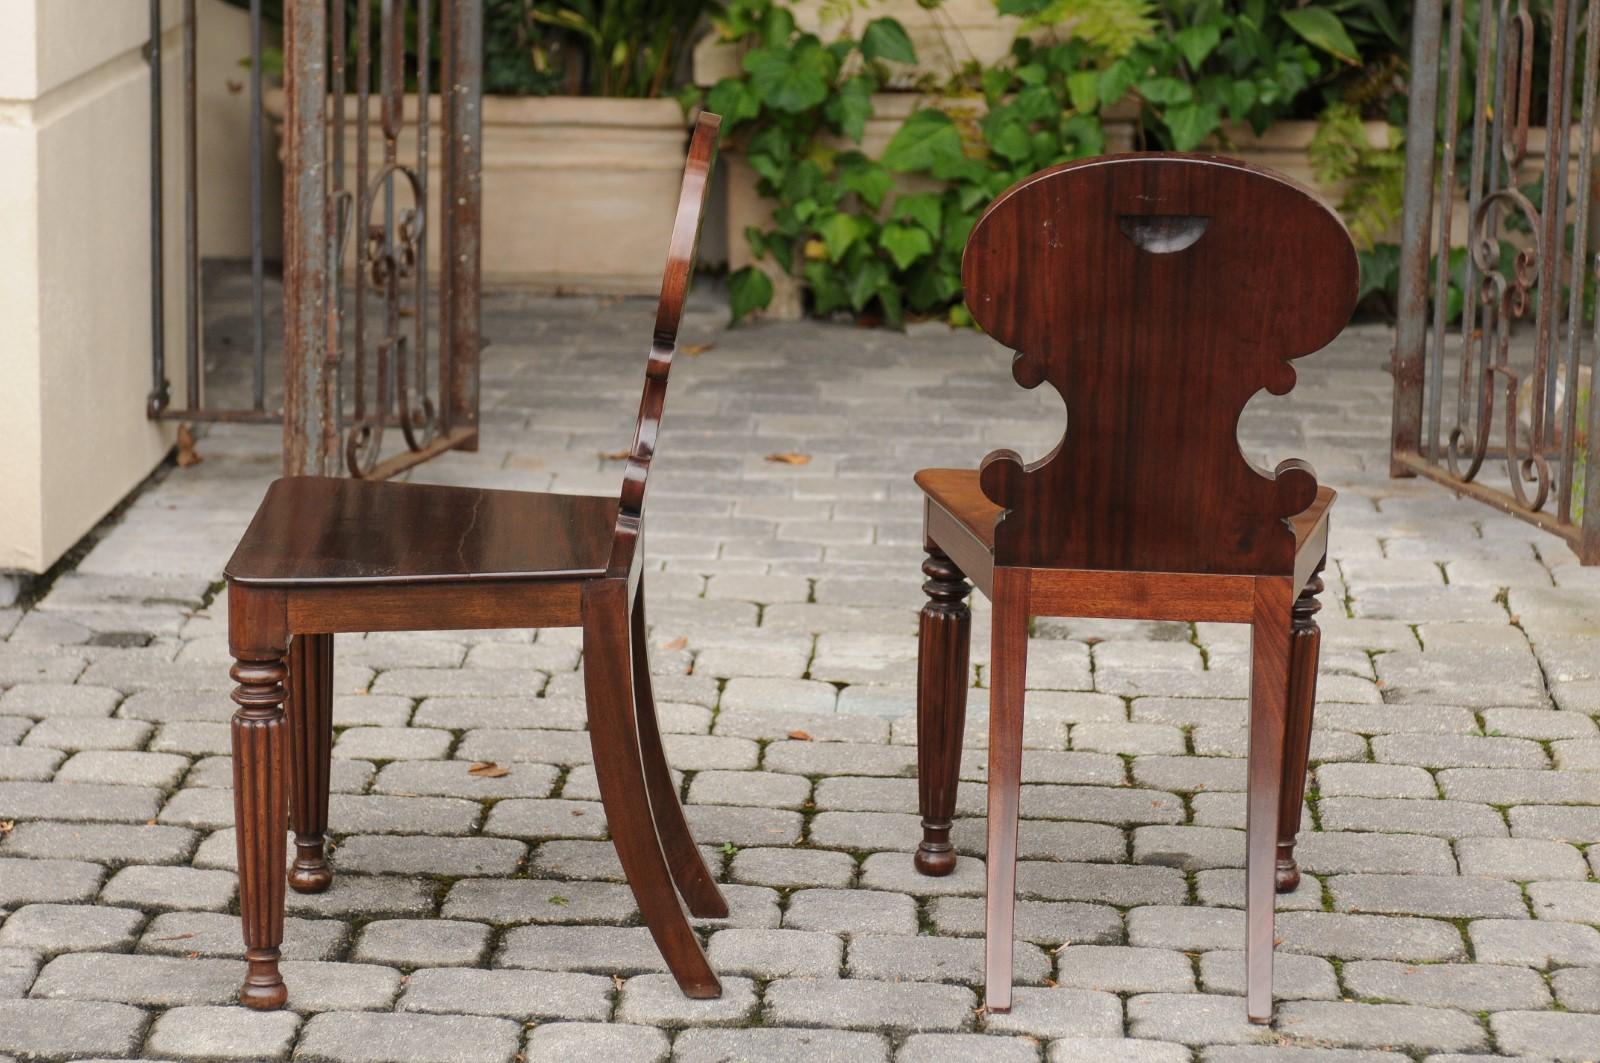 Pair of Regency Style 1870s Carved Mahogany Hall Chairs with C-Scroll Backs (19. Jahrhundert)